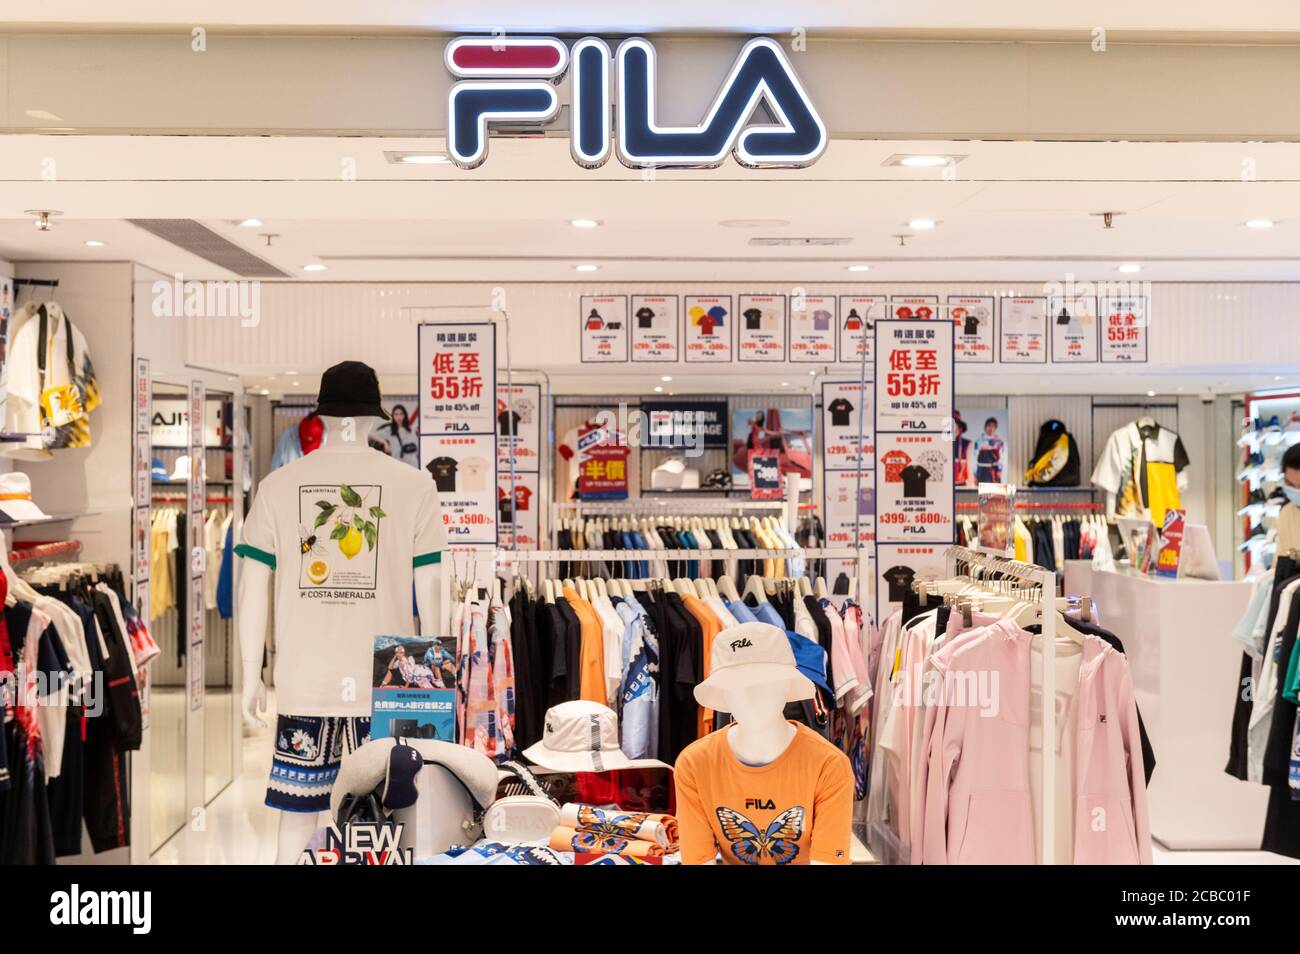 Fila Logo High Resolution Stock Photography and Images - Alamy